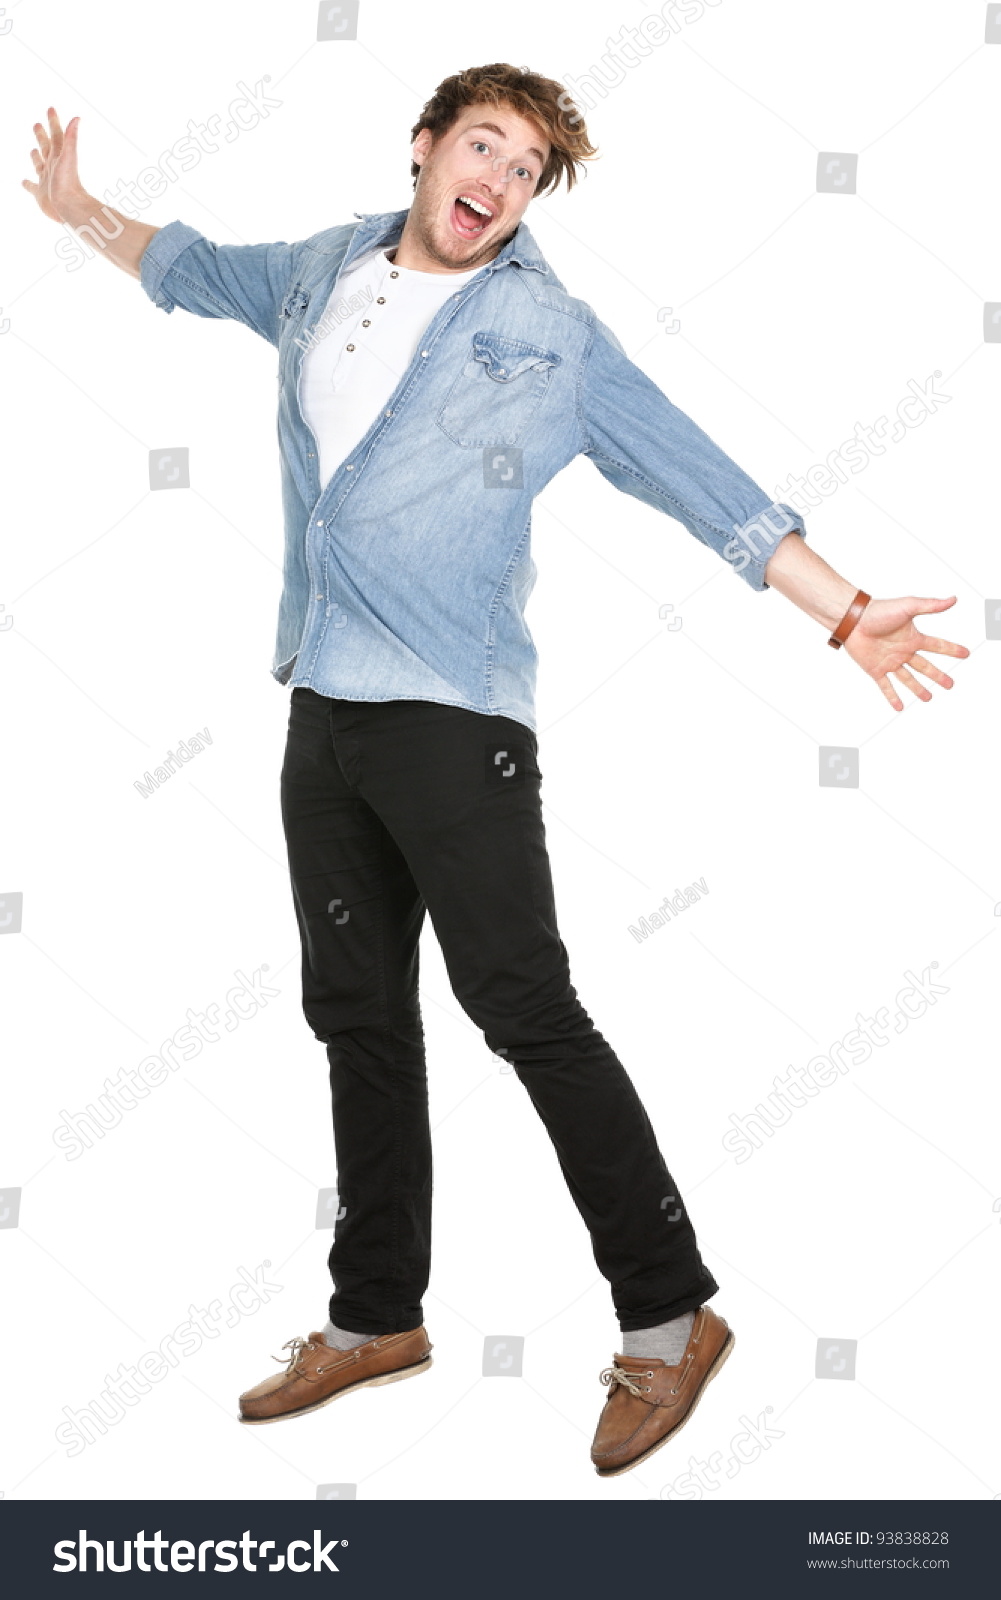 Man Jumping Excited In Full Body Isolated On White Background. Casual ...